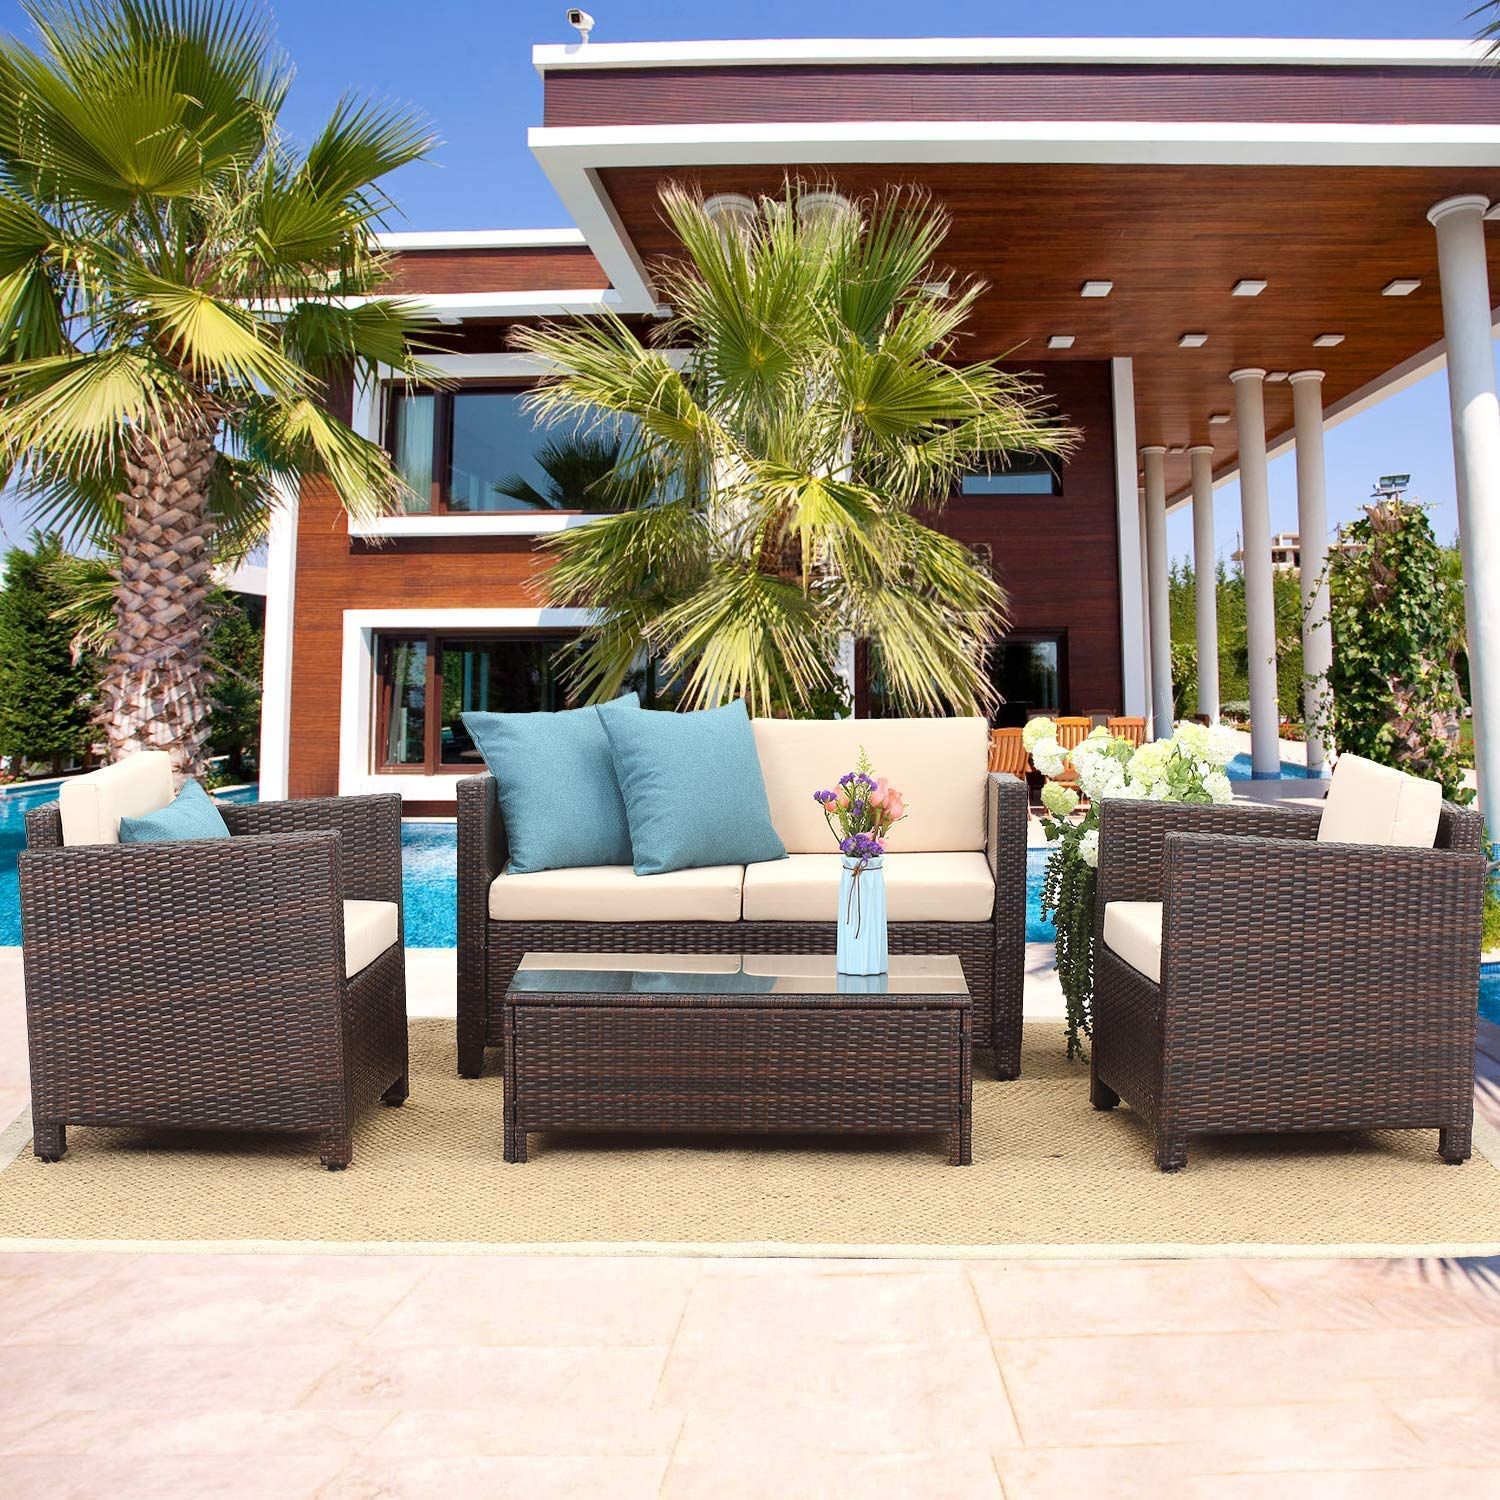 Outdoor Patio Furniture Set, 5 Piece Conversation Set Wicker Sectional Throughout Wicker Beige Cushion Outdoor Patio Sets (View 5 of 15)